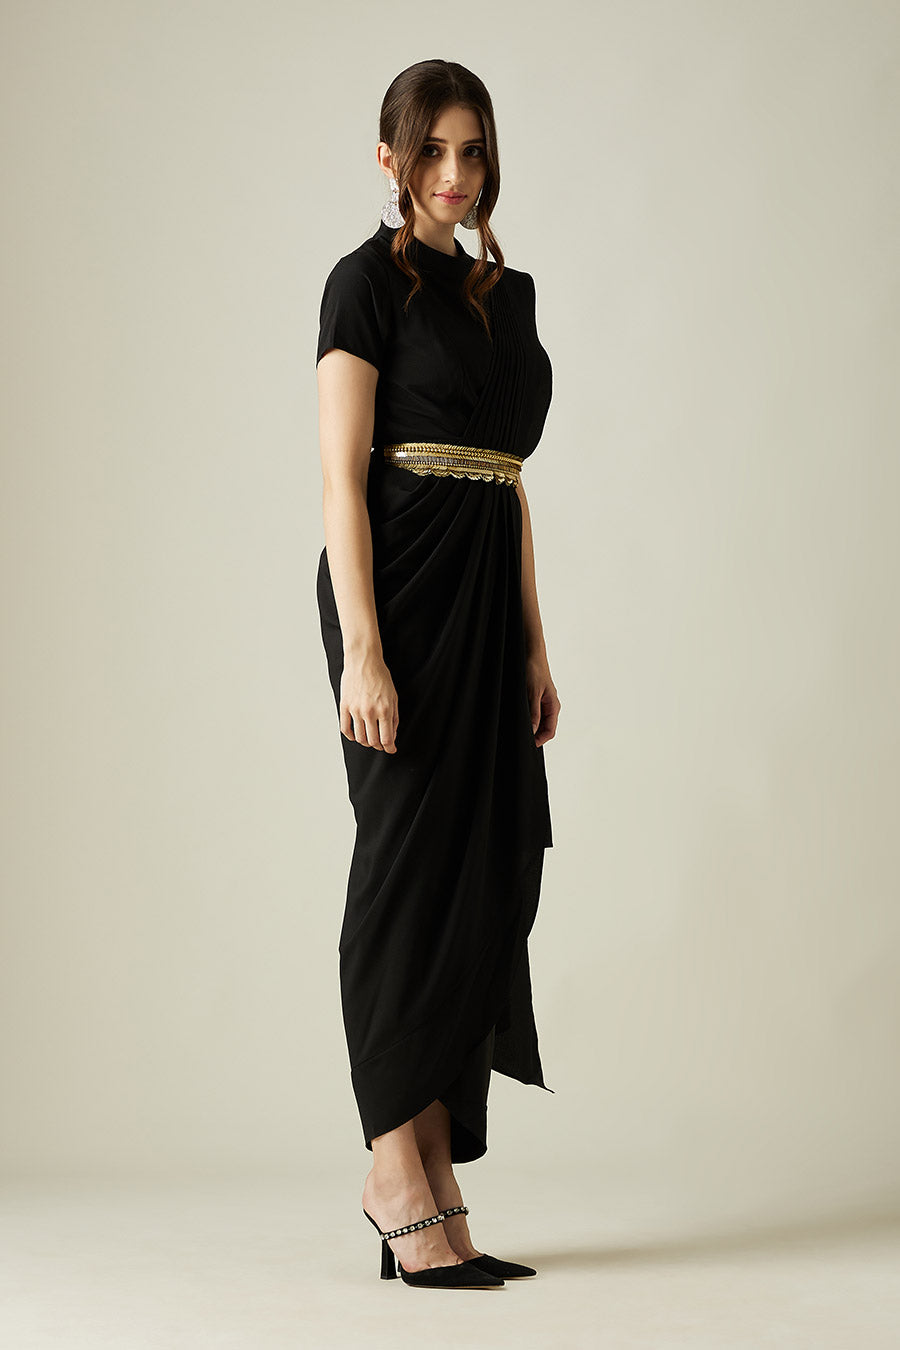 Shop Black Saree Dress With Molten Gold Belt by AAKAAR at House of